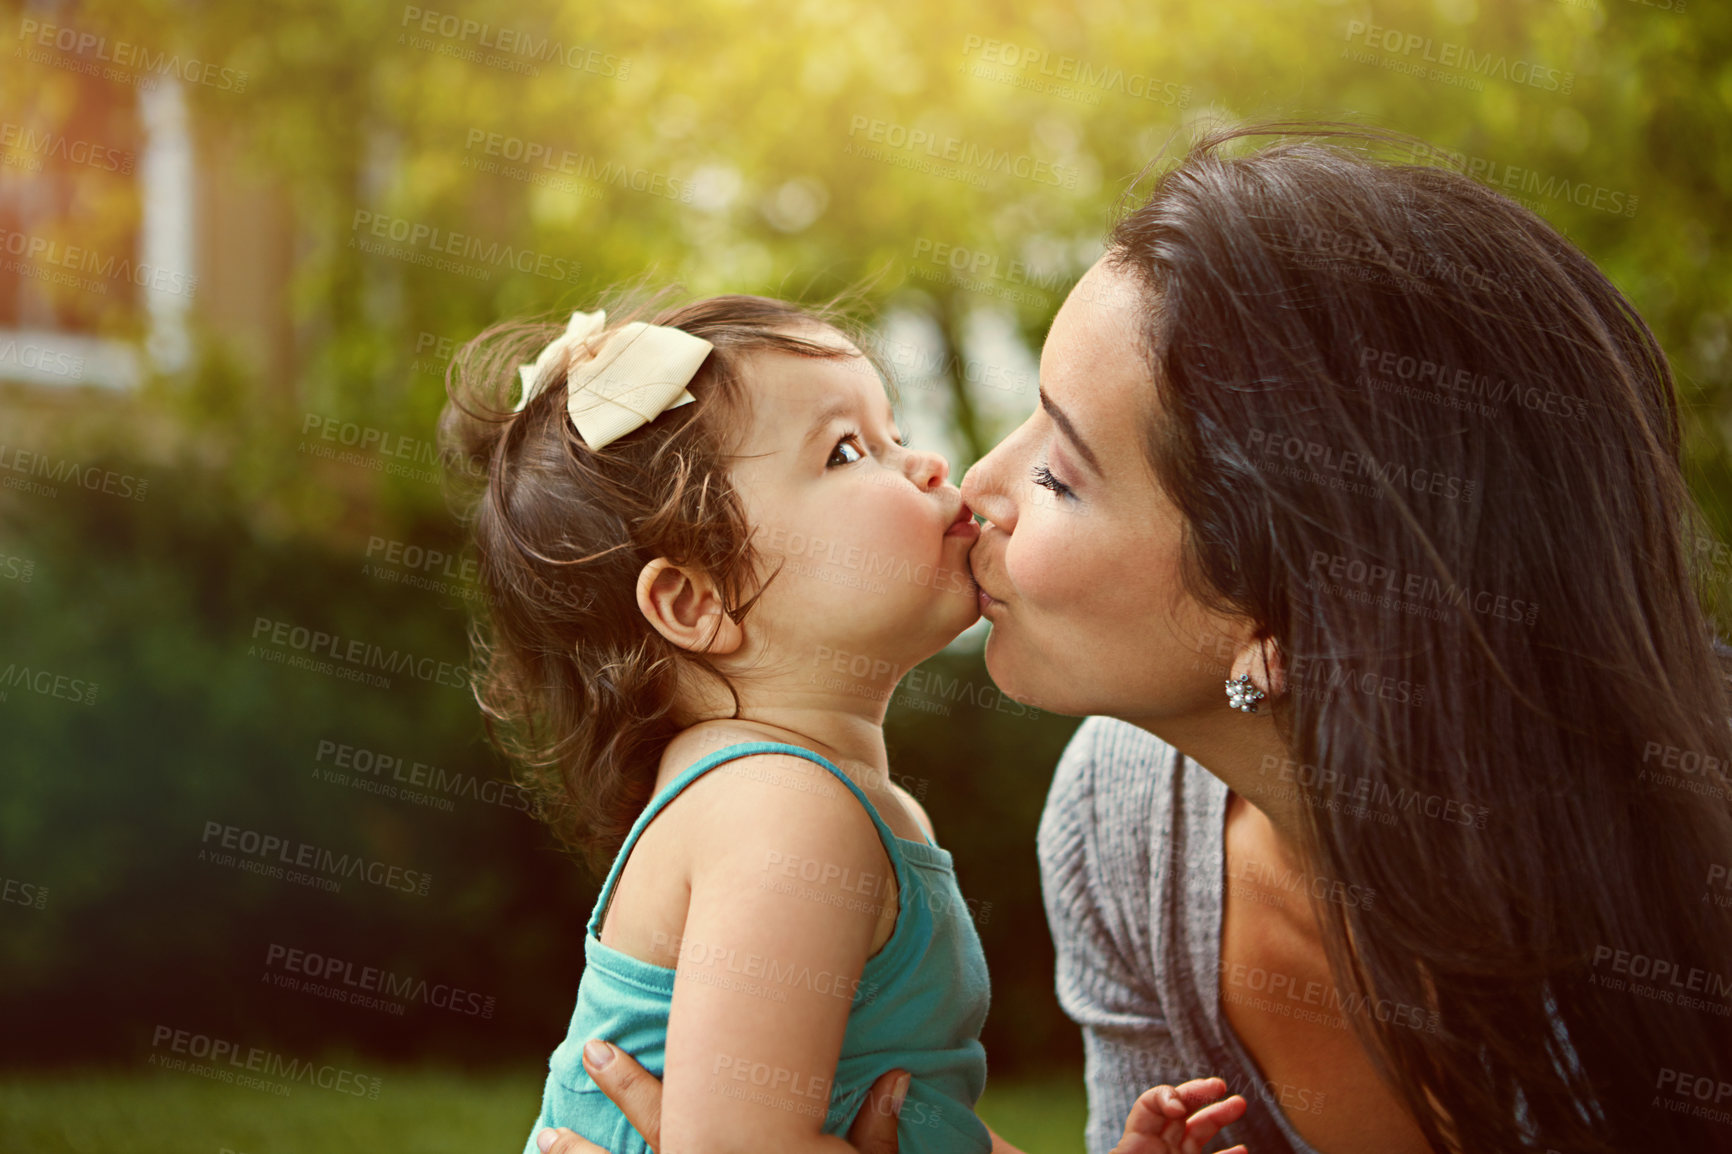 Buy stock photo Cropped shot of a mother giving her adorable little daughter a kiss outside